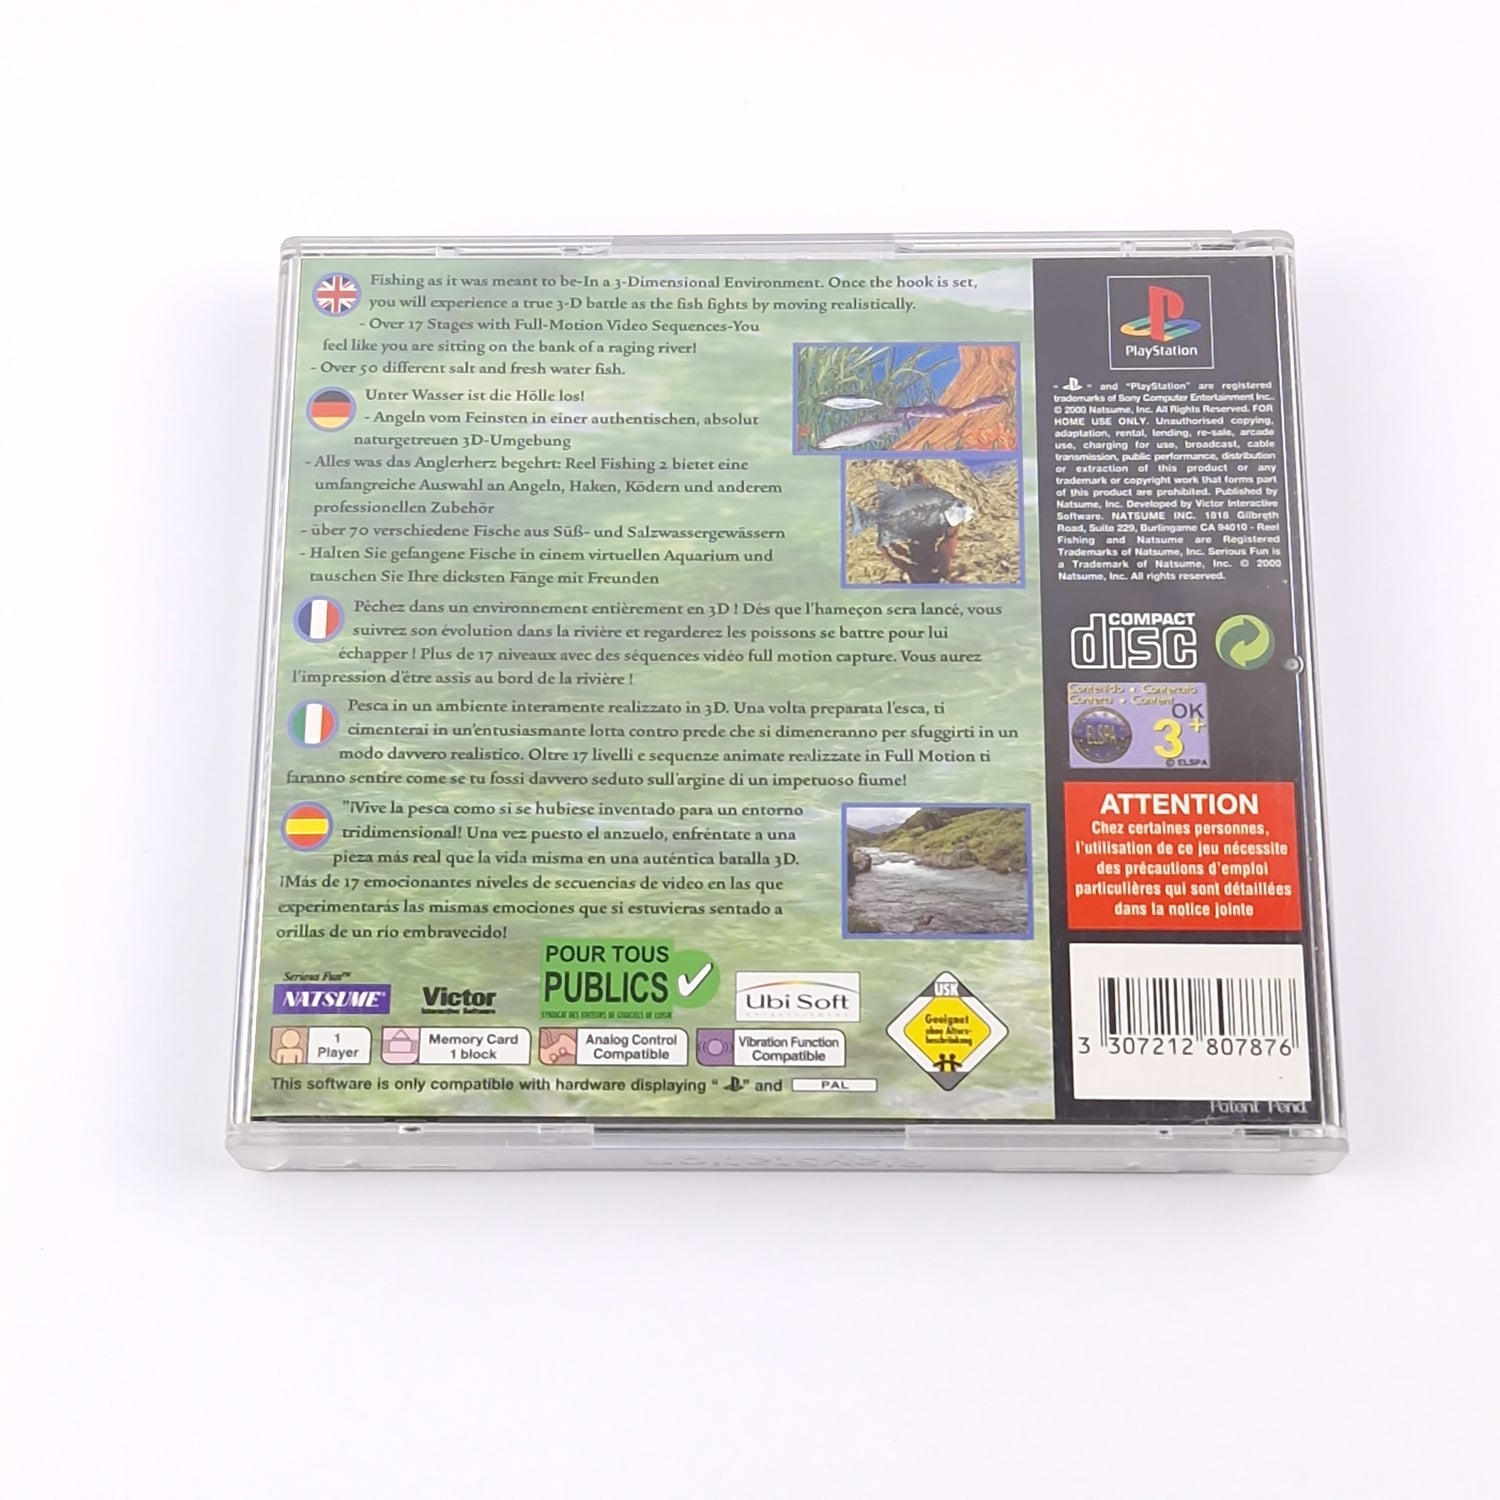 Sony Playstation 1 Spiel : Reel Fishing II 2 - OVP Anleitung - PS1 PSX PAL